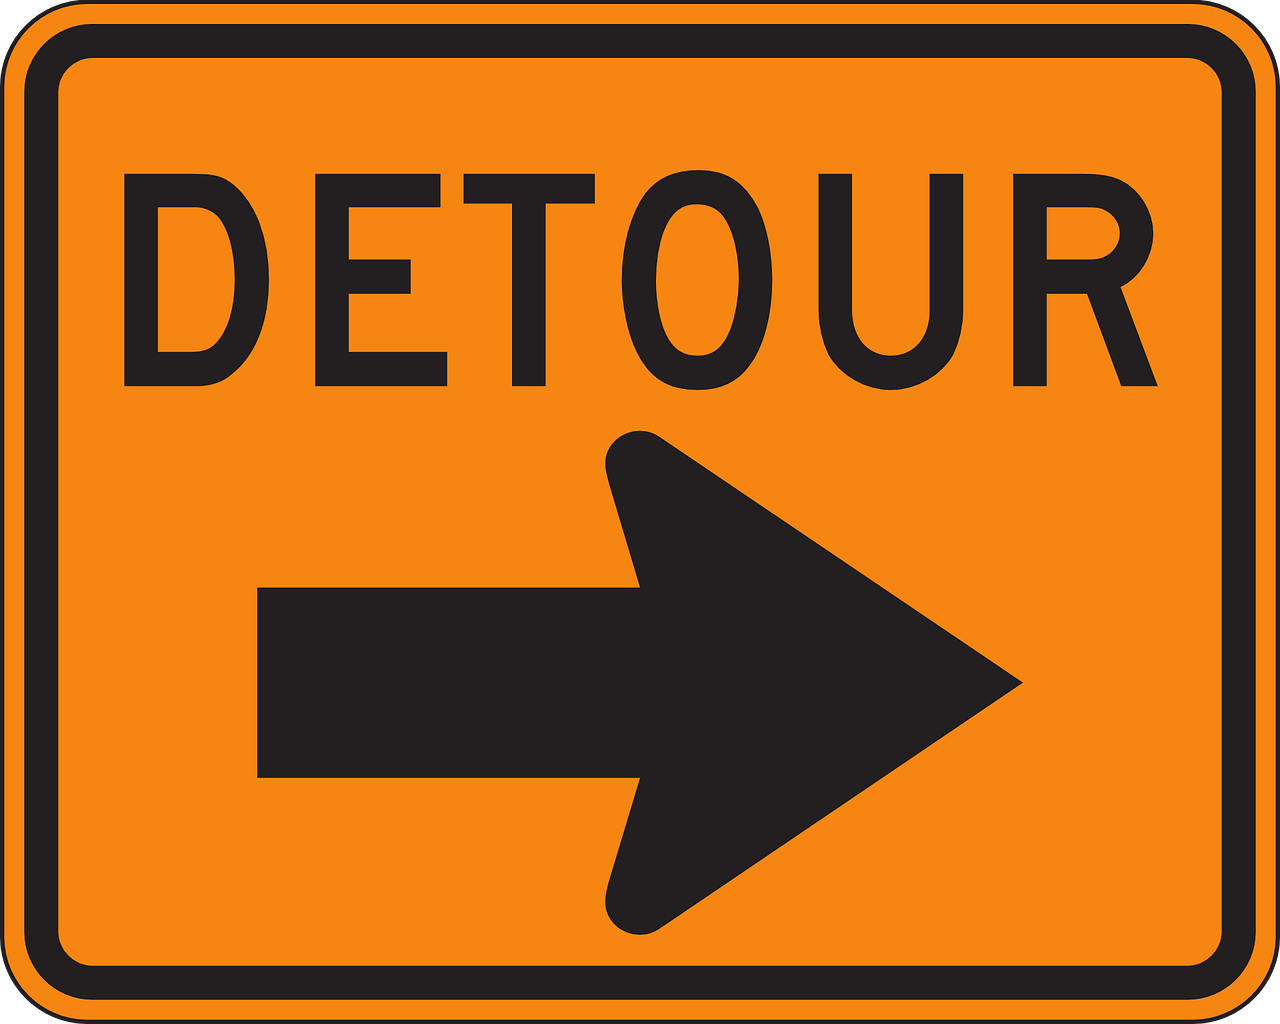 construction sign reading "detour" with a black arrow pointing to the right side of the sign.